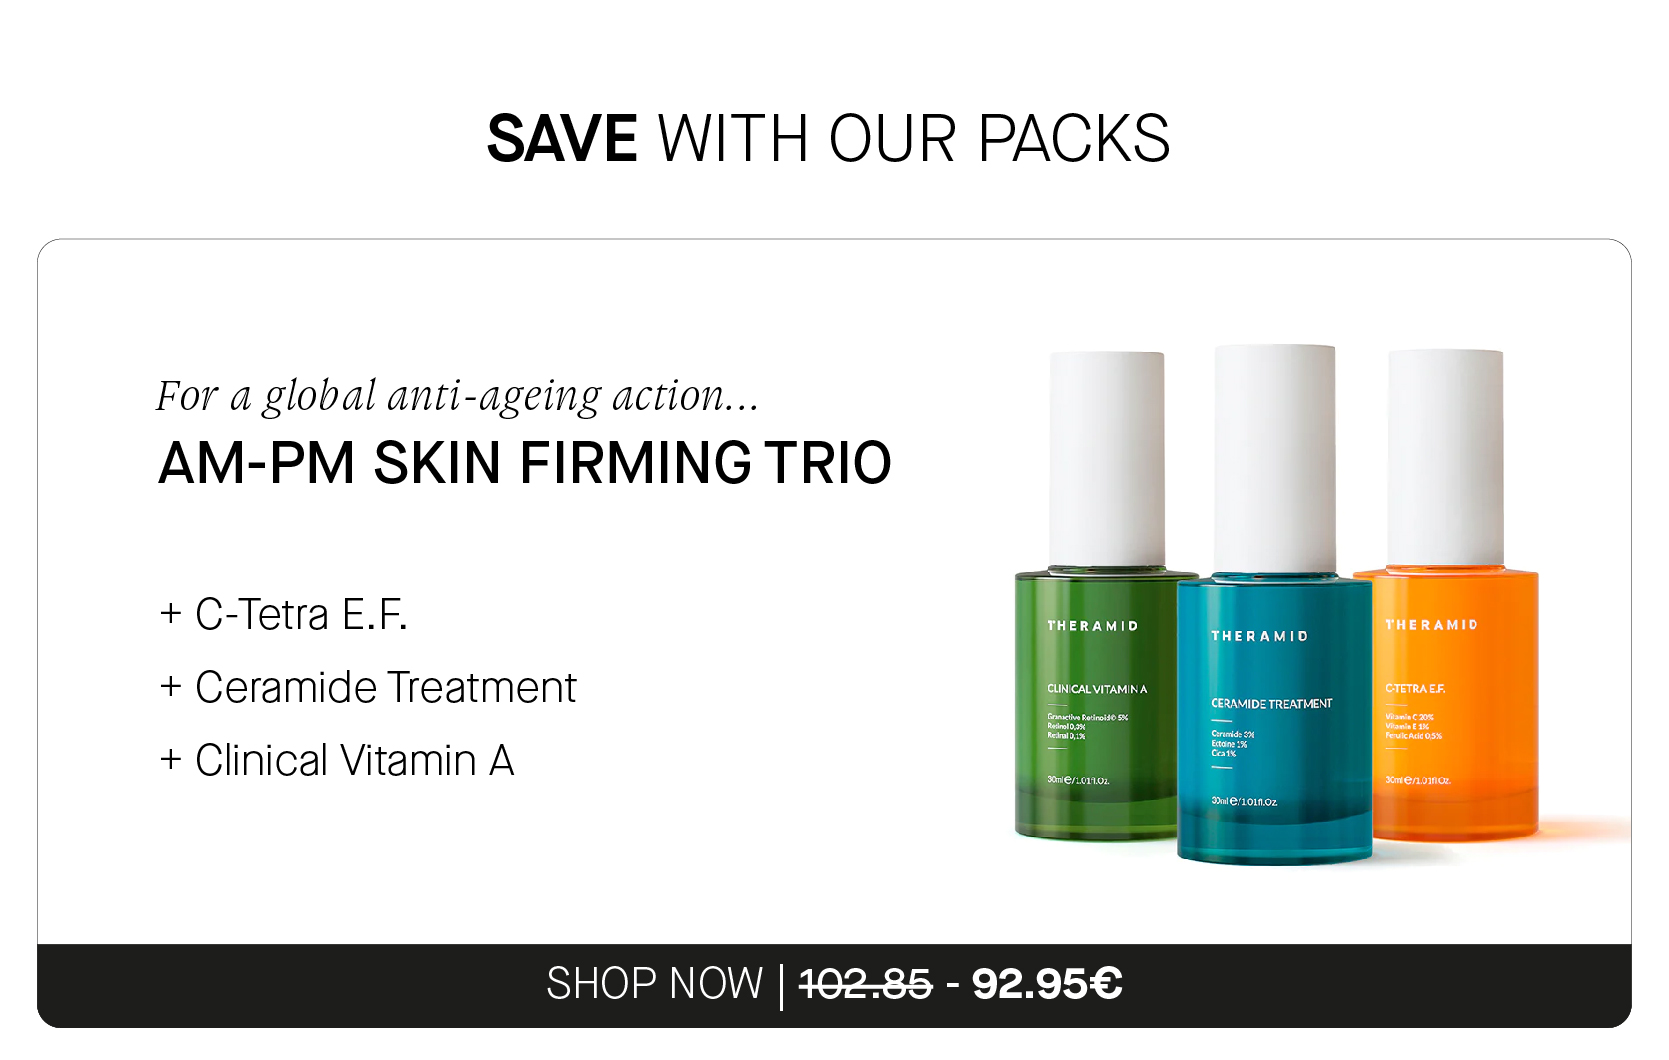 SAVE WITH OUR PACKS For a global anti-ageing action... AM-PM SKIN FIRMING TRIO C-Tetra E.F. THERAMID THERAMID VIV Ceramide Treatment Clinical Vitamin A SHOP NOW 162-85 - 92.95 